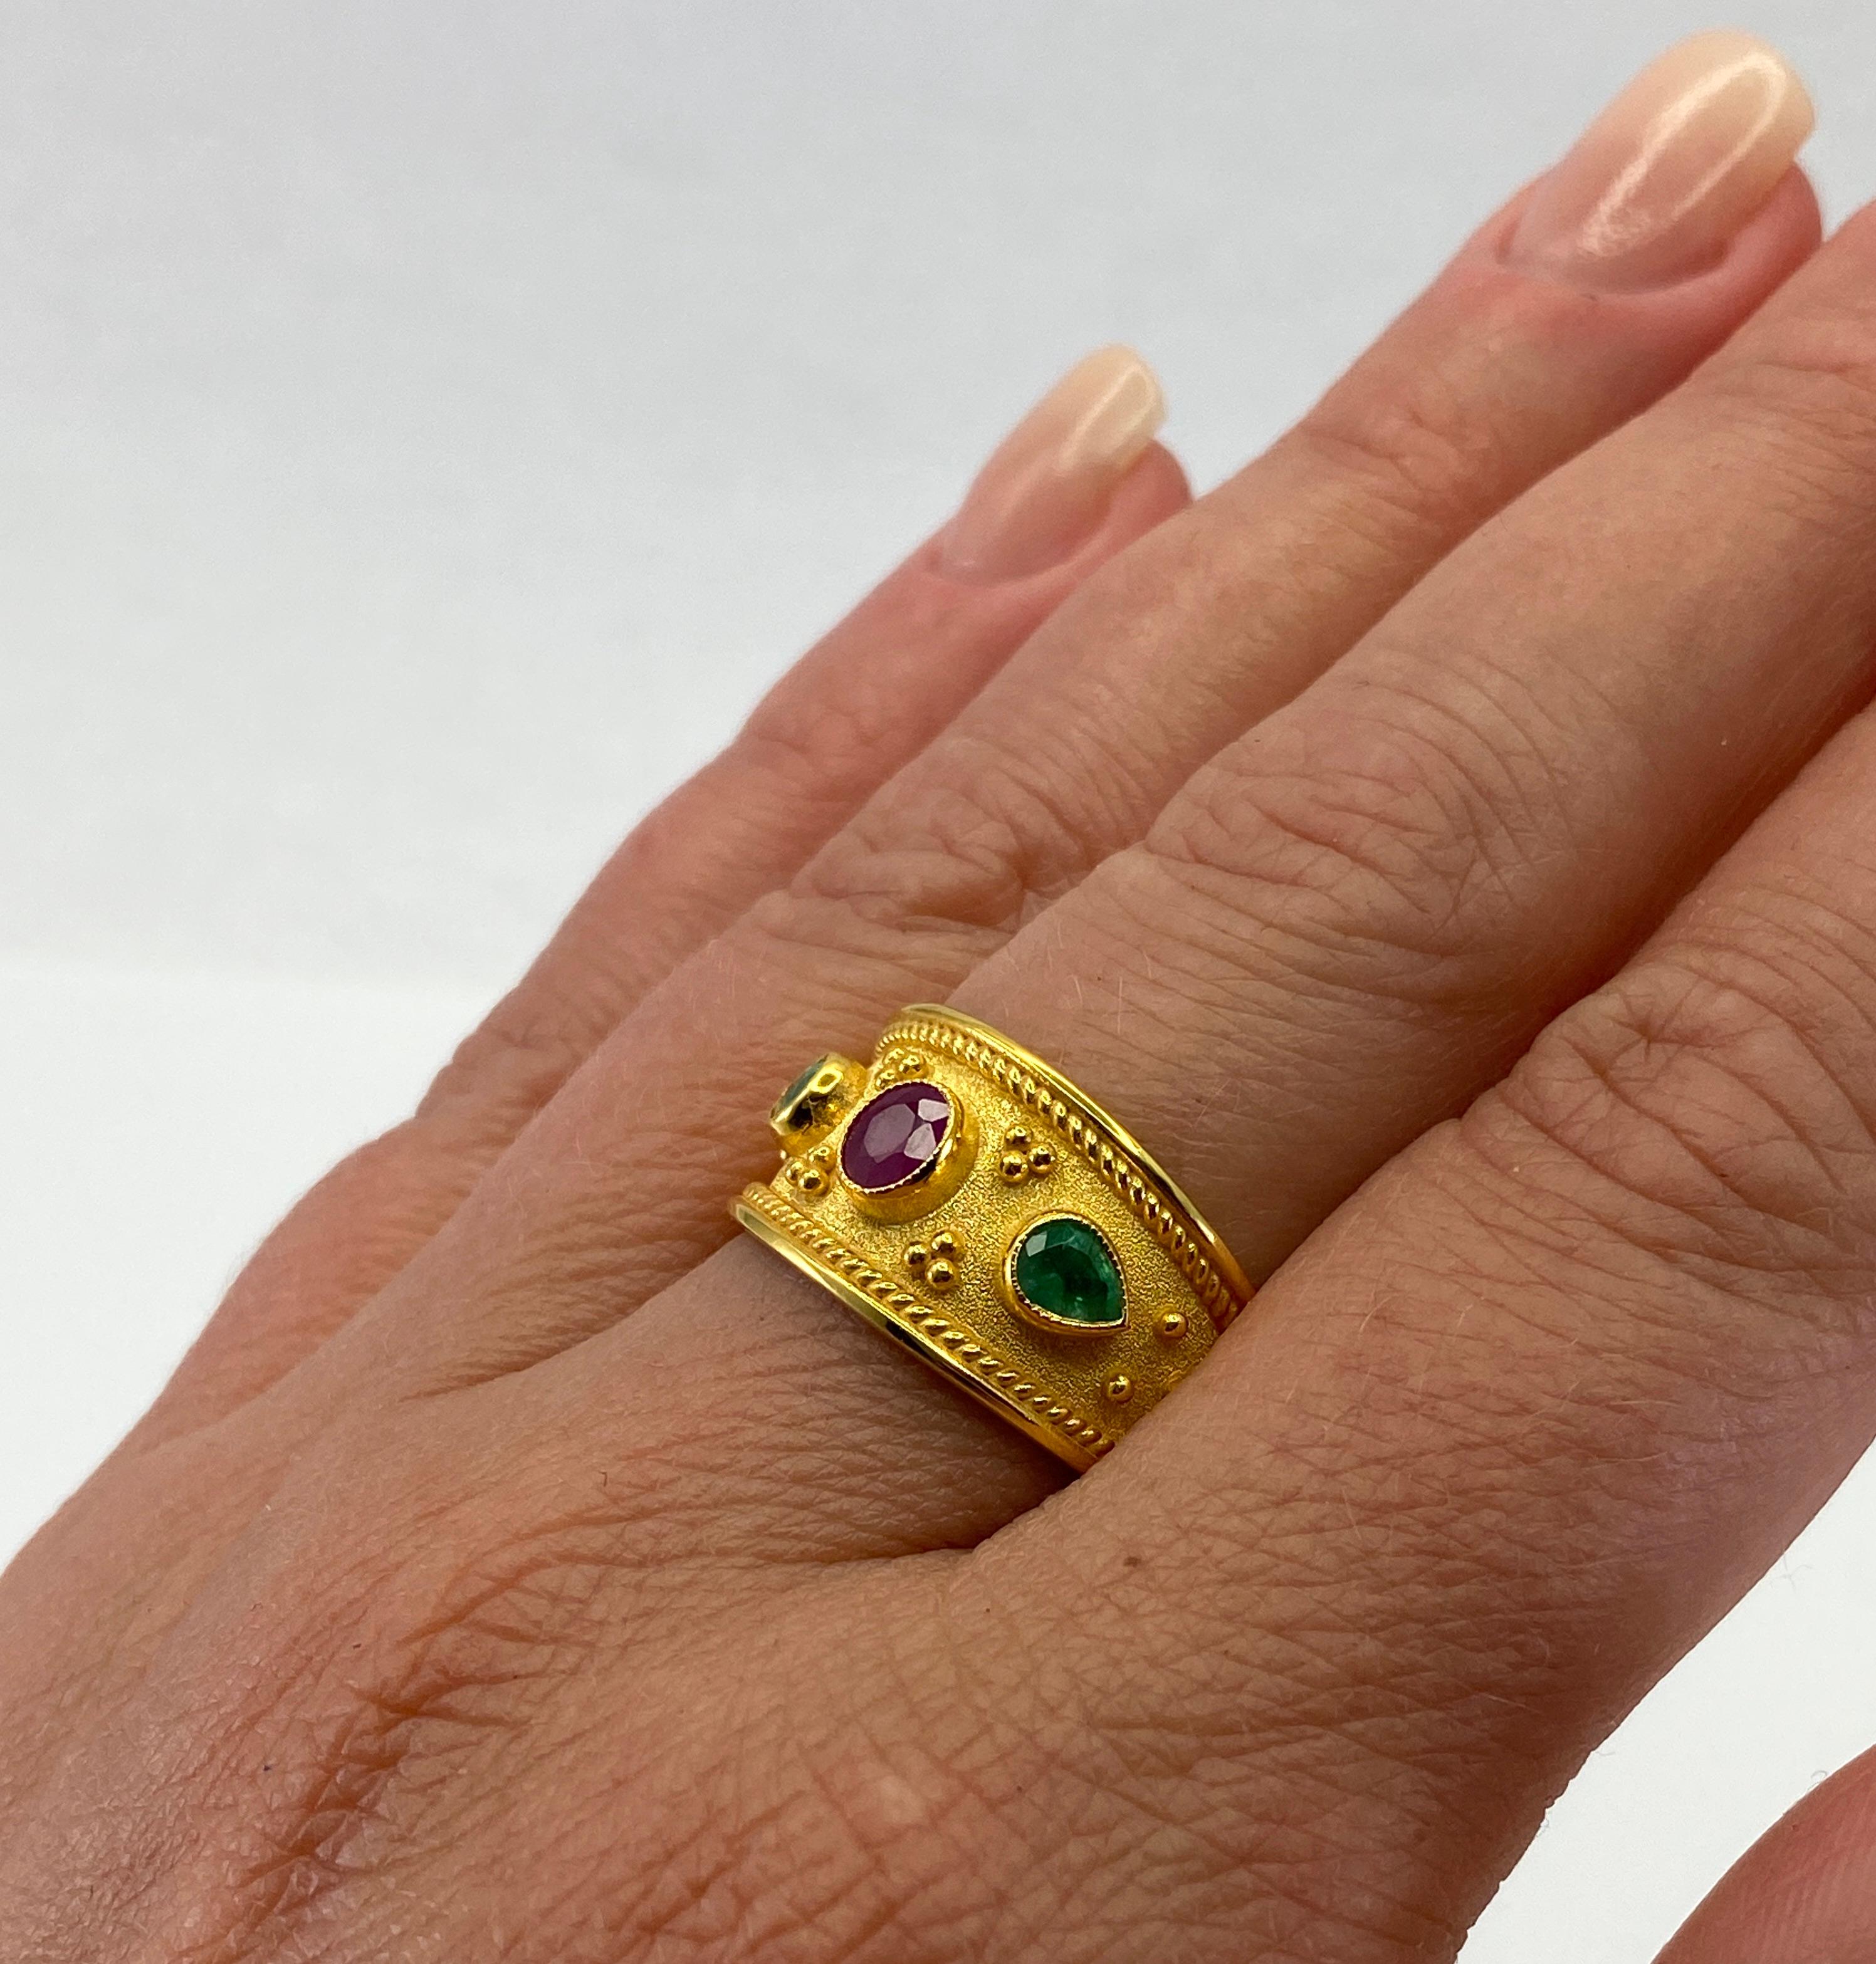 Presenting S.Georgios designer 18 Karat Solid Yellow Gold Ring all handmade in Byzantine Style workmanship with a unique velvet background and granulation. This ring features 0.56 Carat oval cut Ruby in the center and 2 pear shape Emeralds total